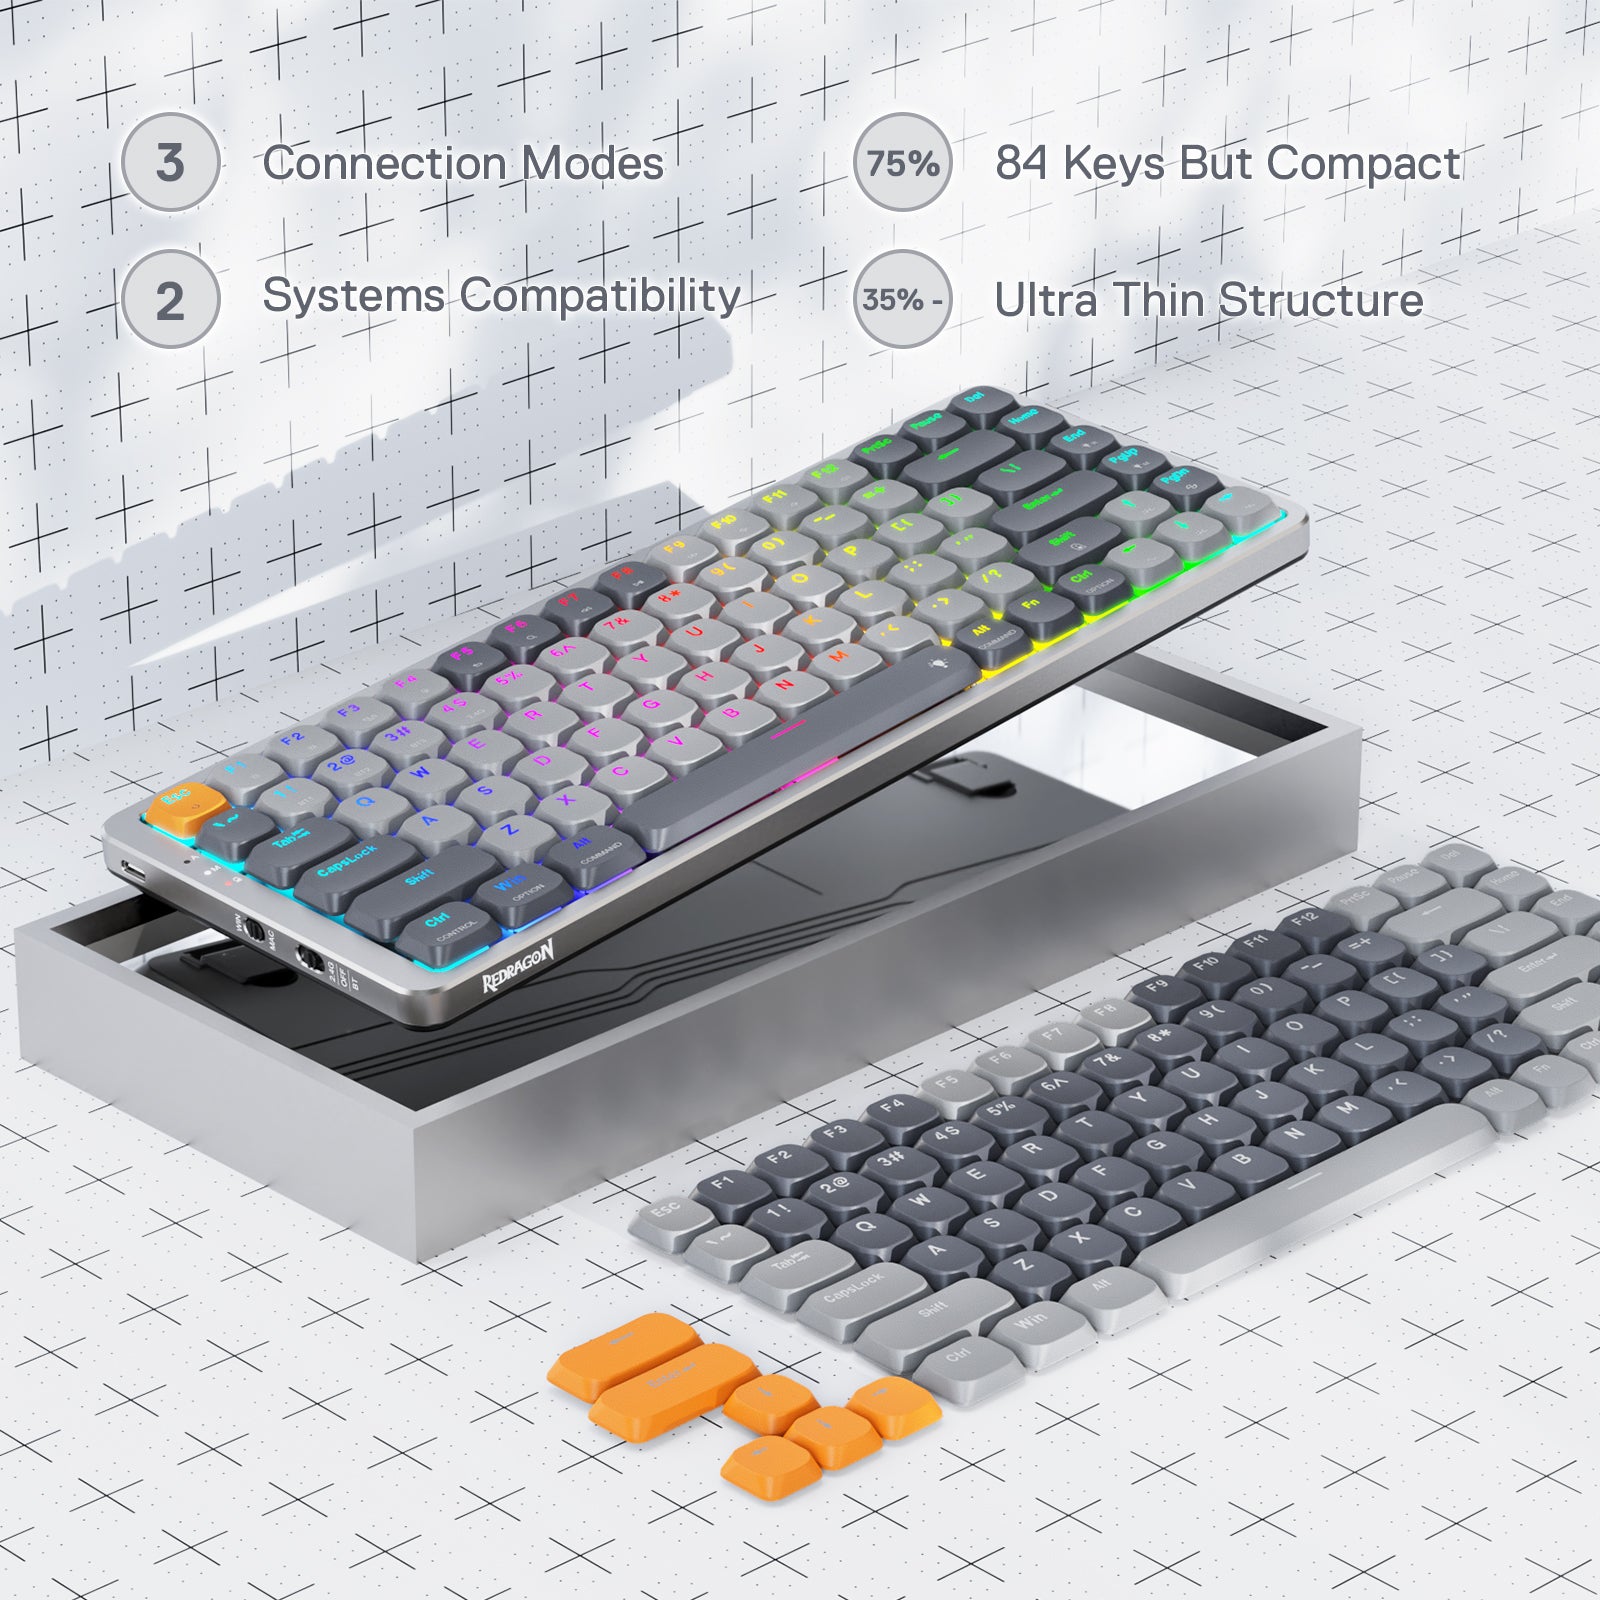 Redragon K652 Keyboard - Dual Main System Supported and Ultra-Thin 